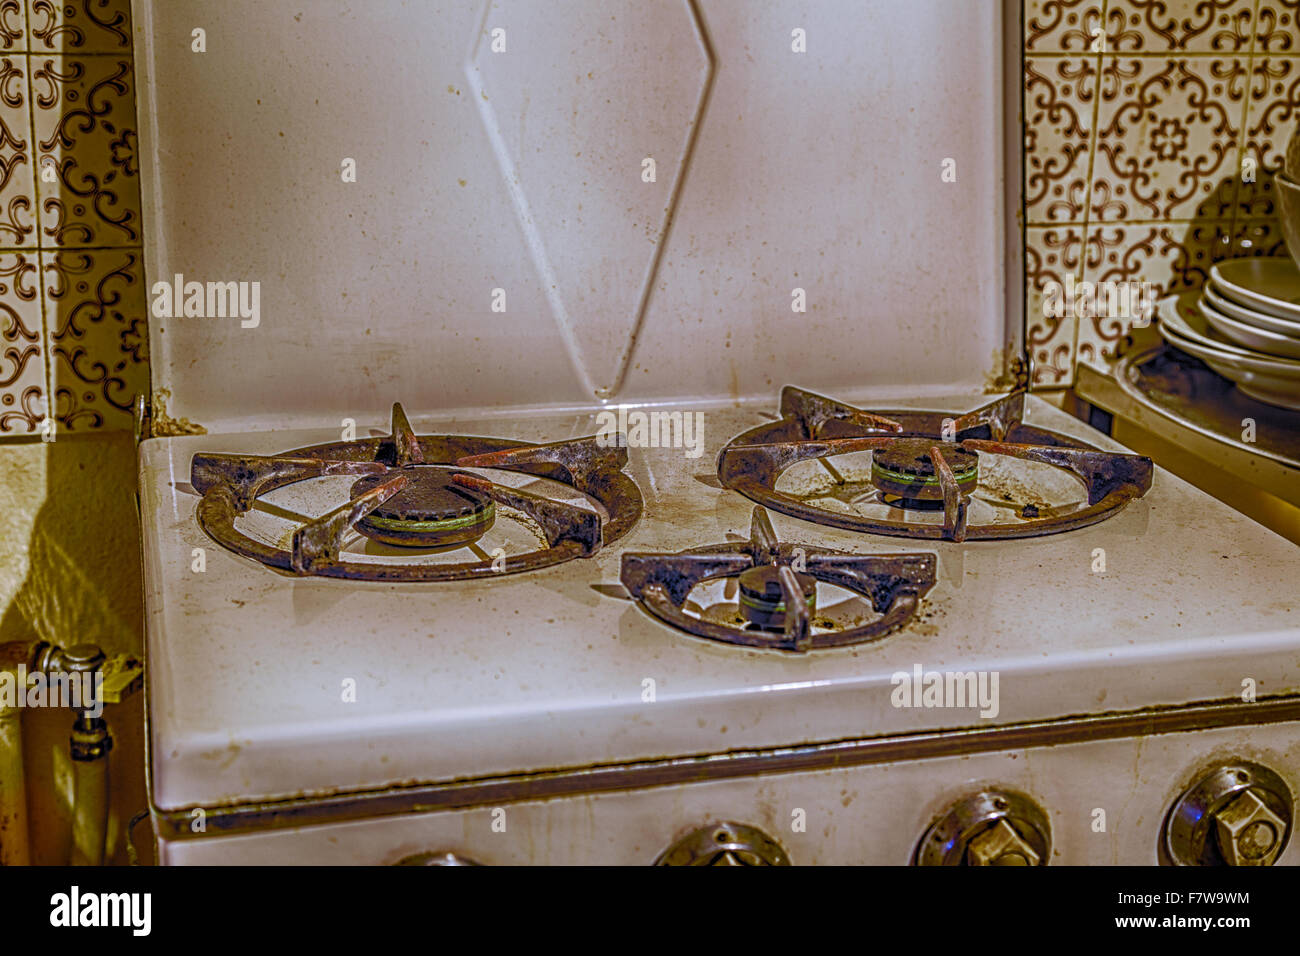 old encrusted gas stove with three burners Stock Photo